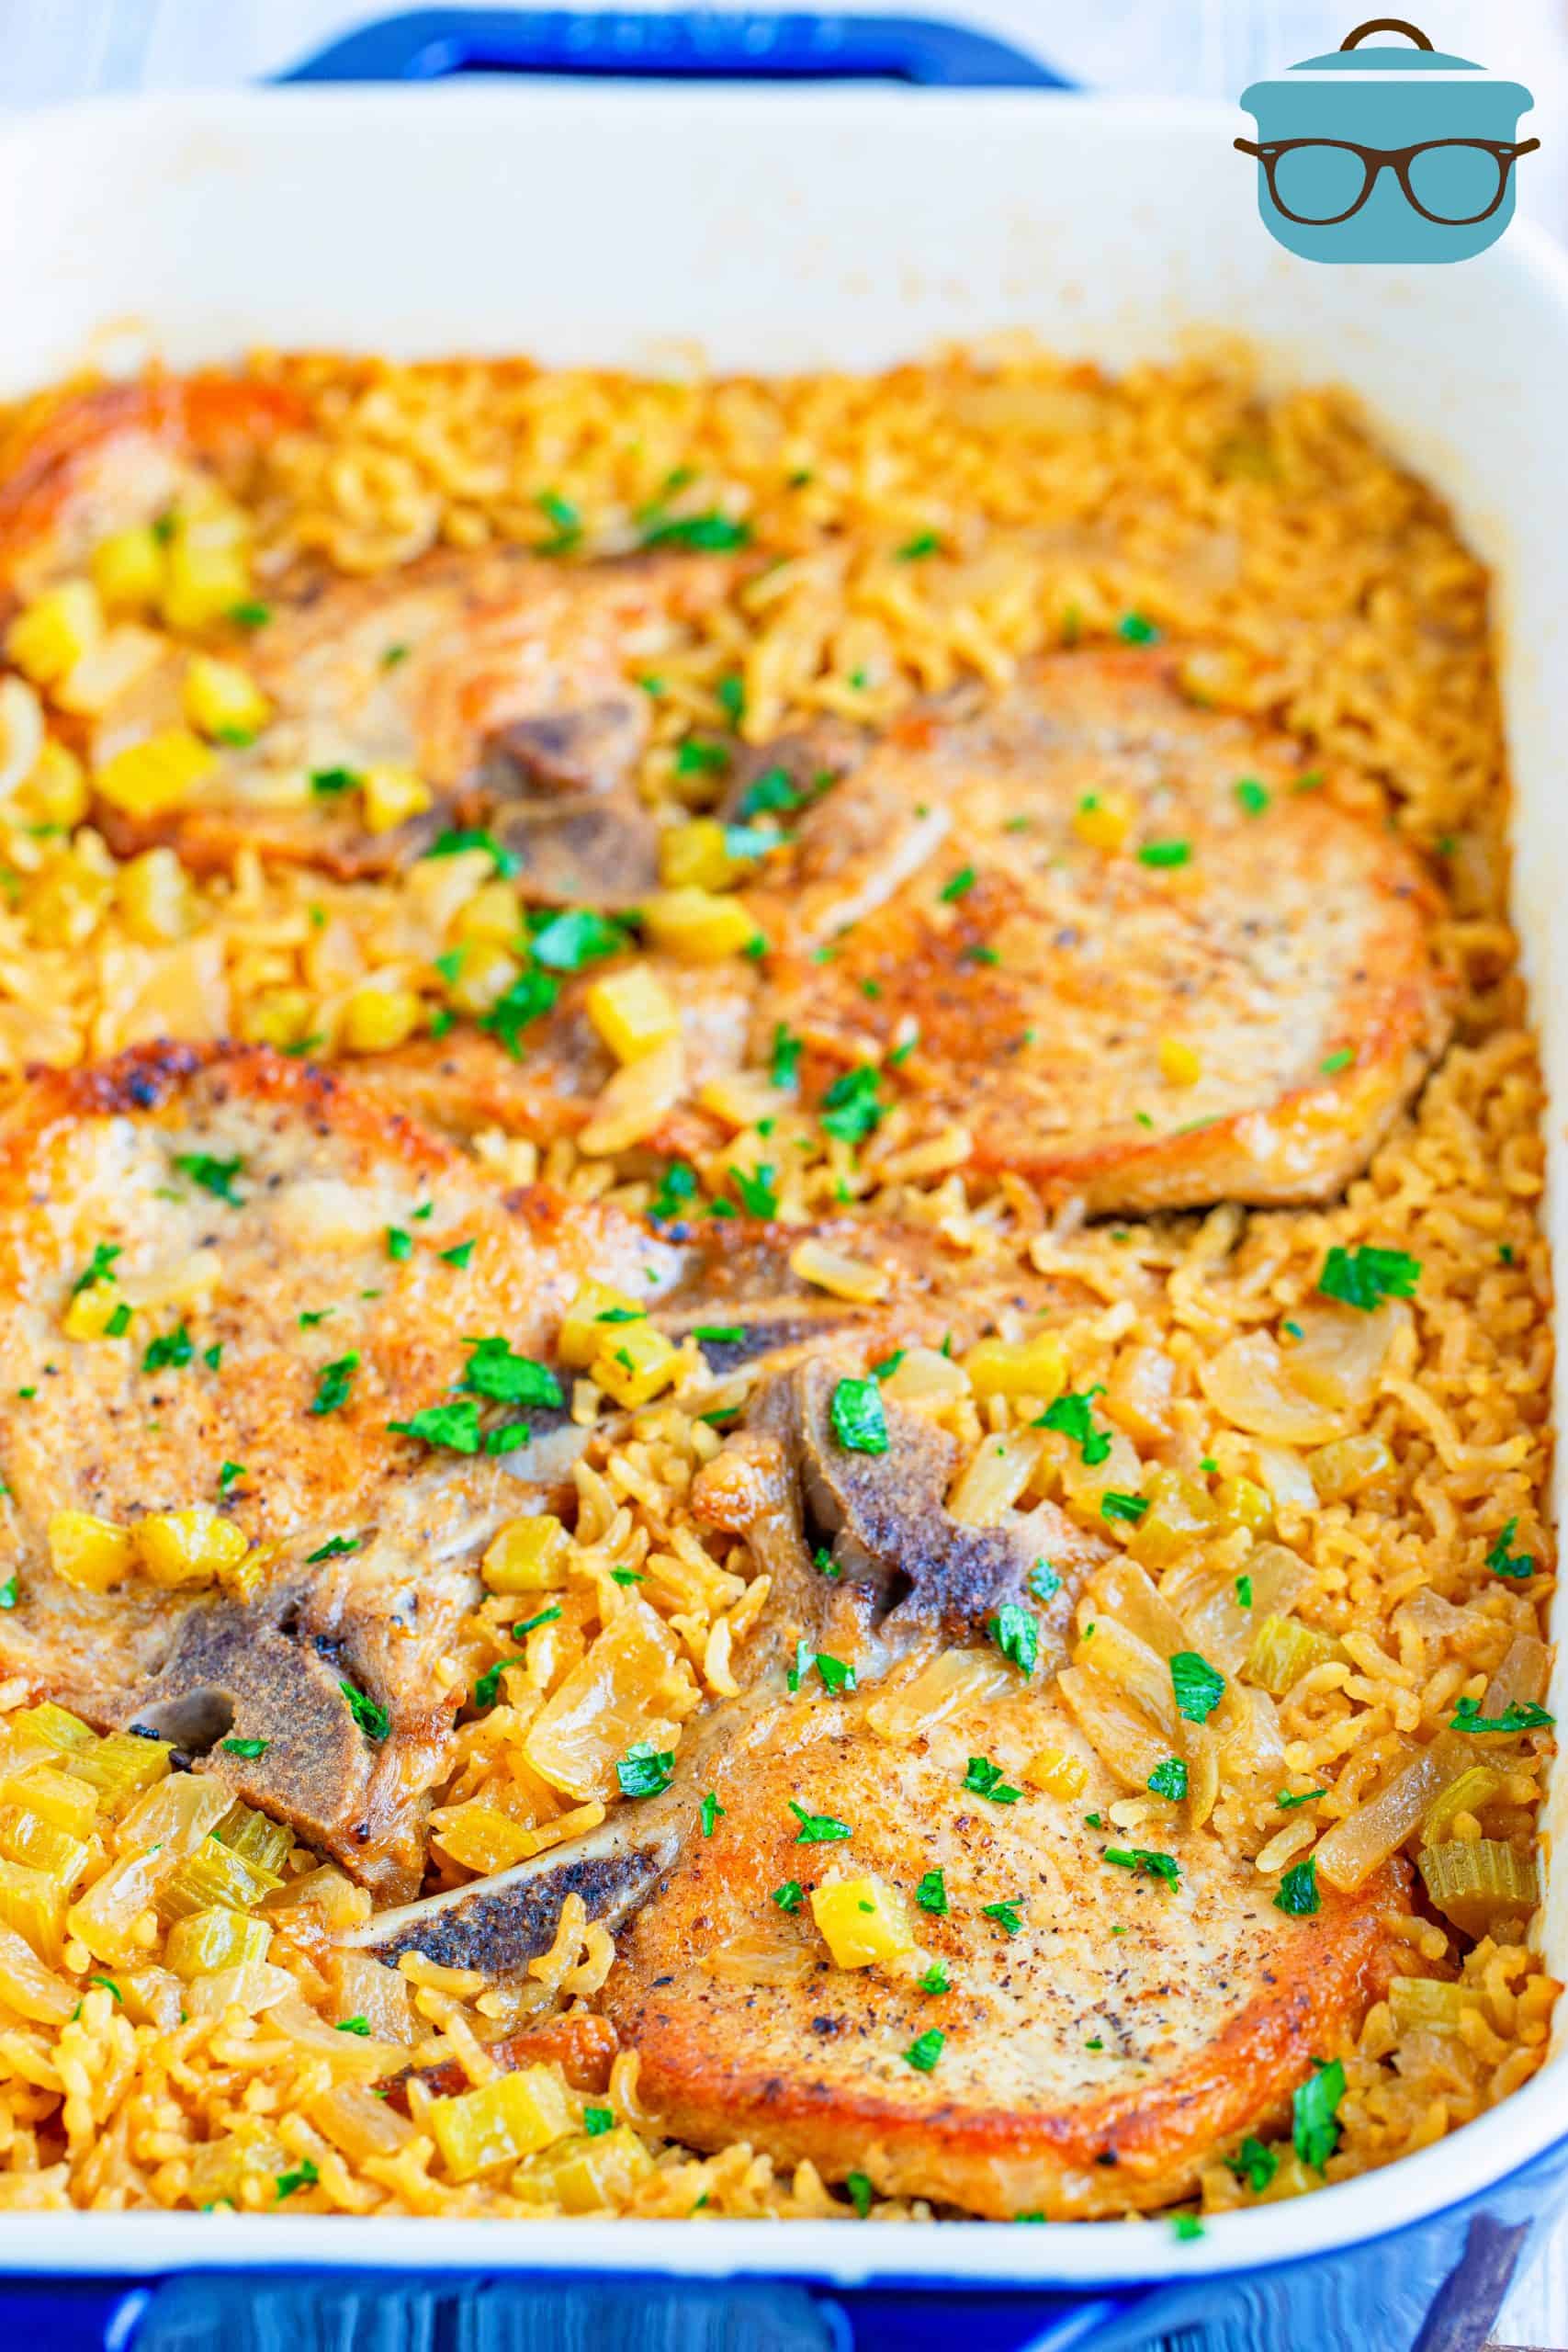 rice and pork chops shown fully baked in a baking dish.